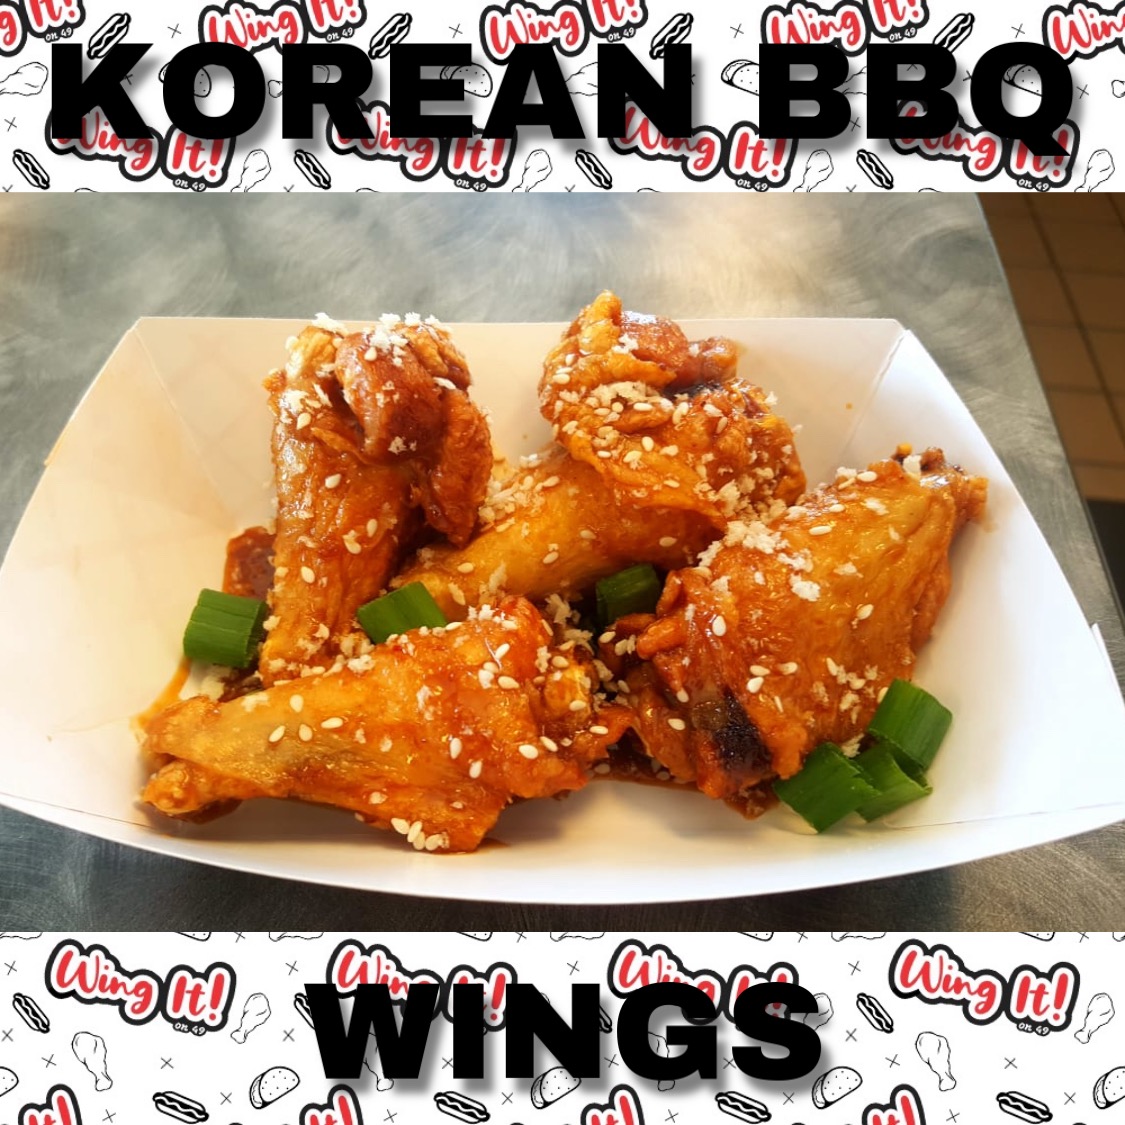 KOREAN BBQ WINGS will be your new favorite. We took the flavors of our best selling Taco the Korean BBQ Short Rib Taco and made a Wing Sauce. Come try it out, I promise they won’t disappoint. #KoreanBBQWings #BestWingsInAmadorCounty #AmadorCounty #JacksonCA #WingItOn49 #HotWings